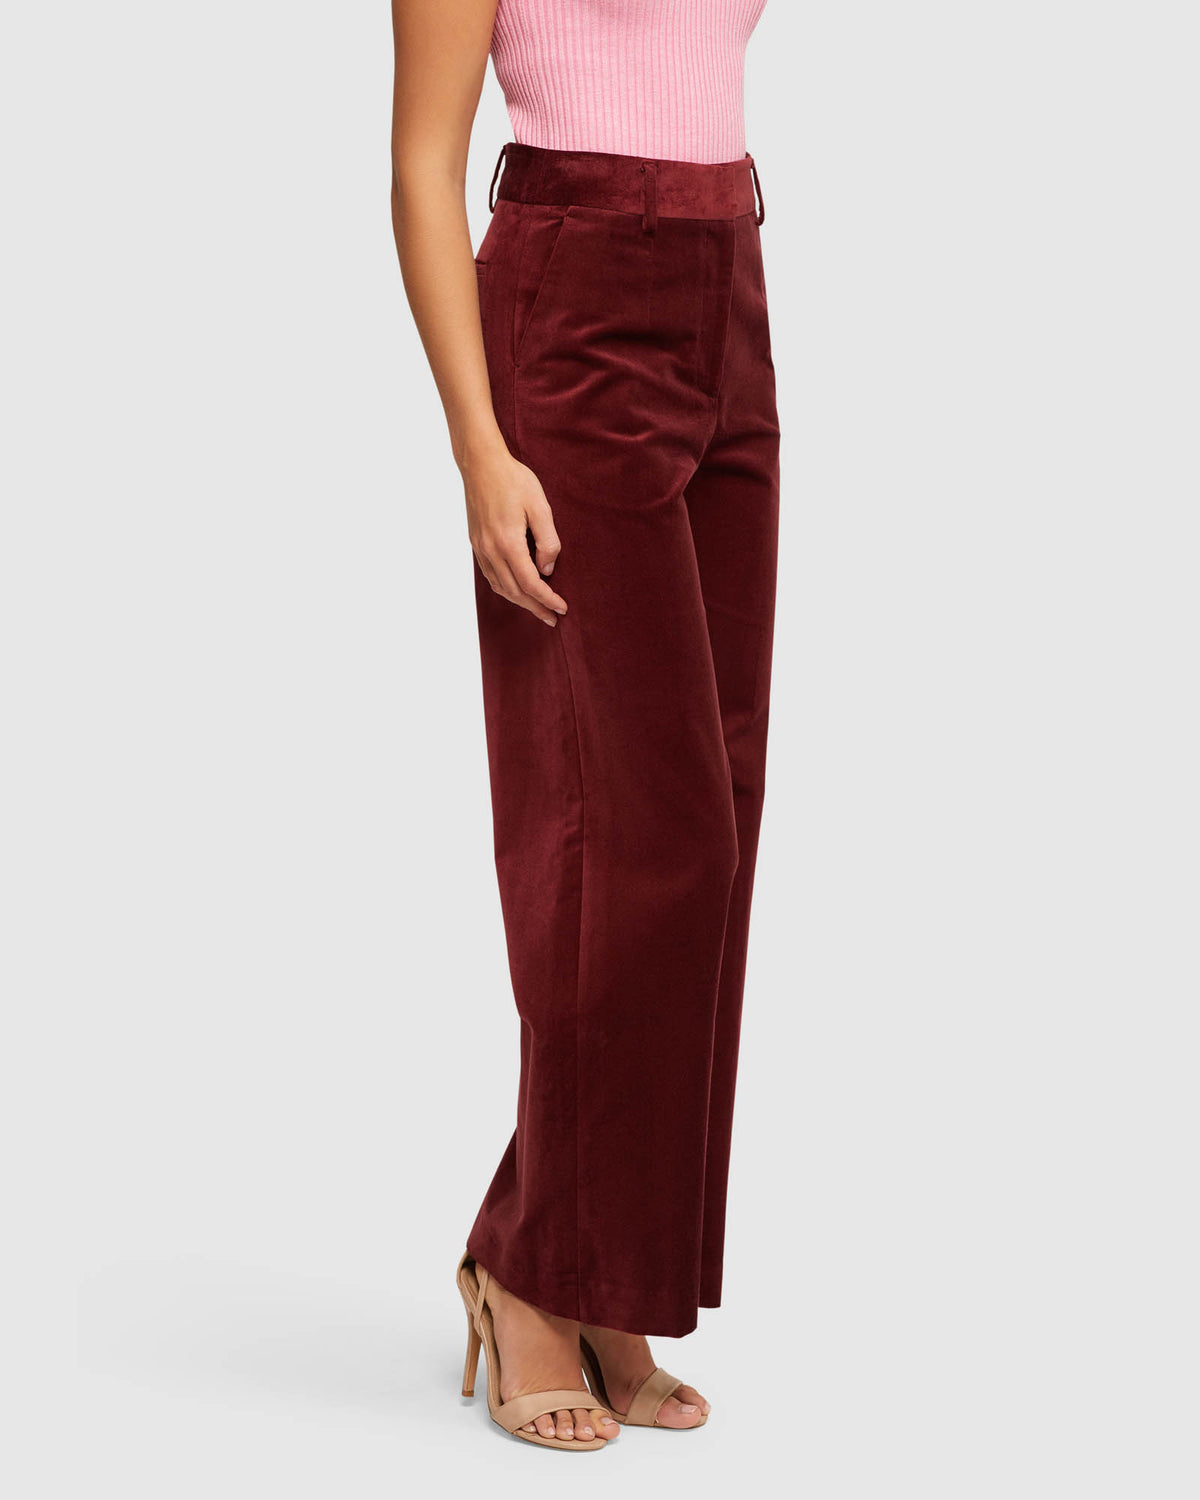 The Row Ribbed Velvet 5 pockets Pants women - Glamood Outlet